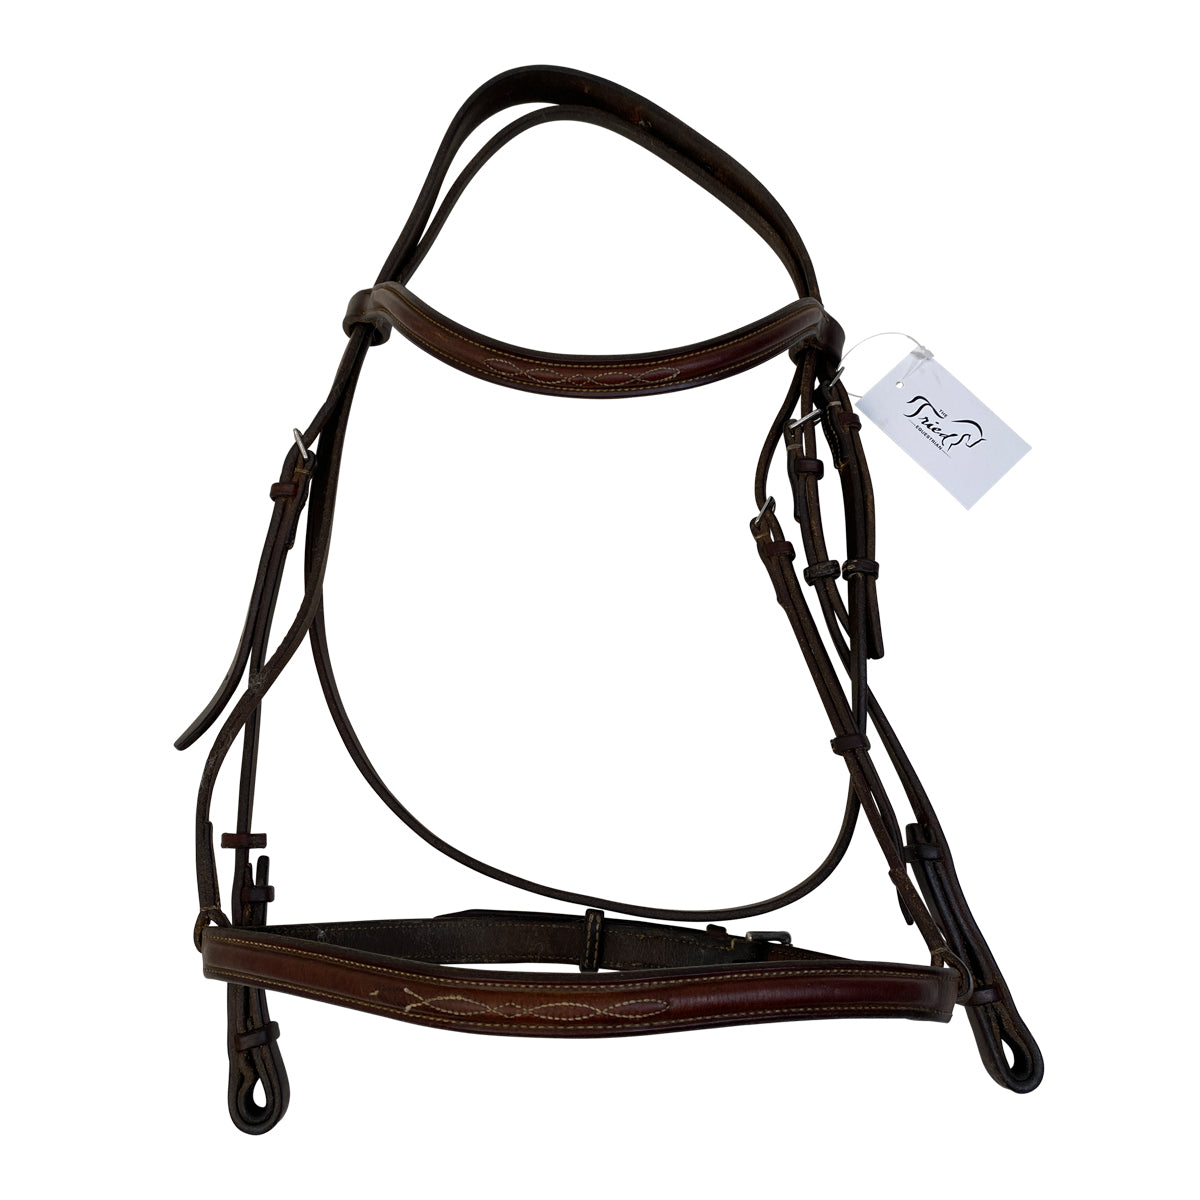 Edgewood Fancy Raised Bridle in Oiled Newmarket